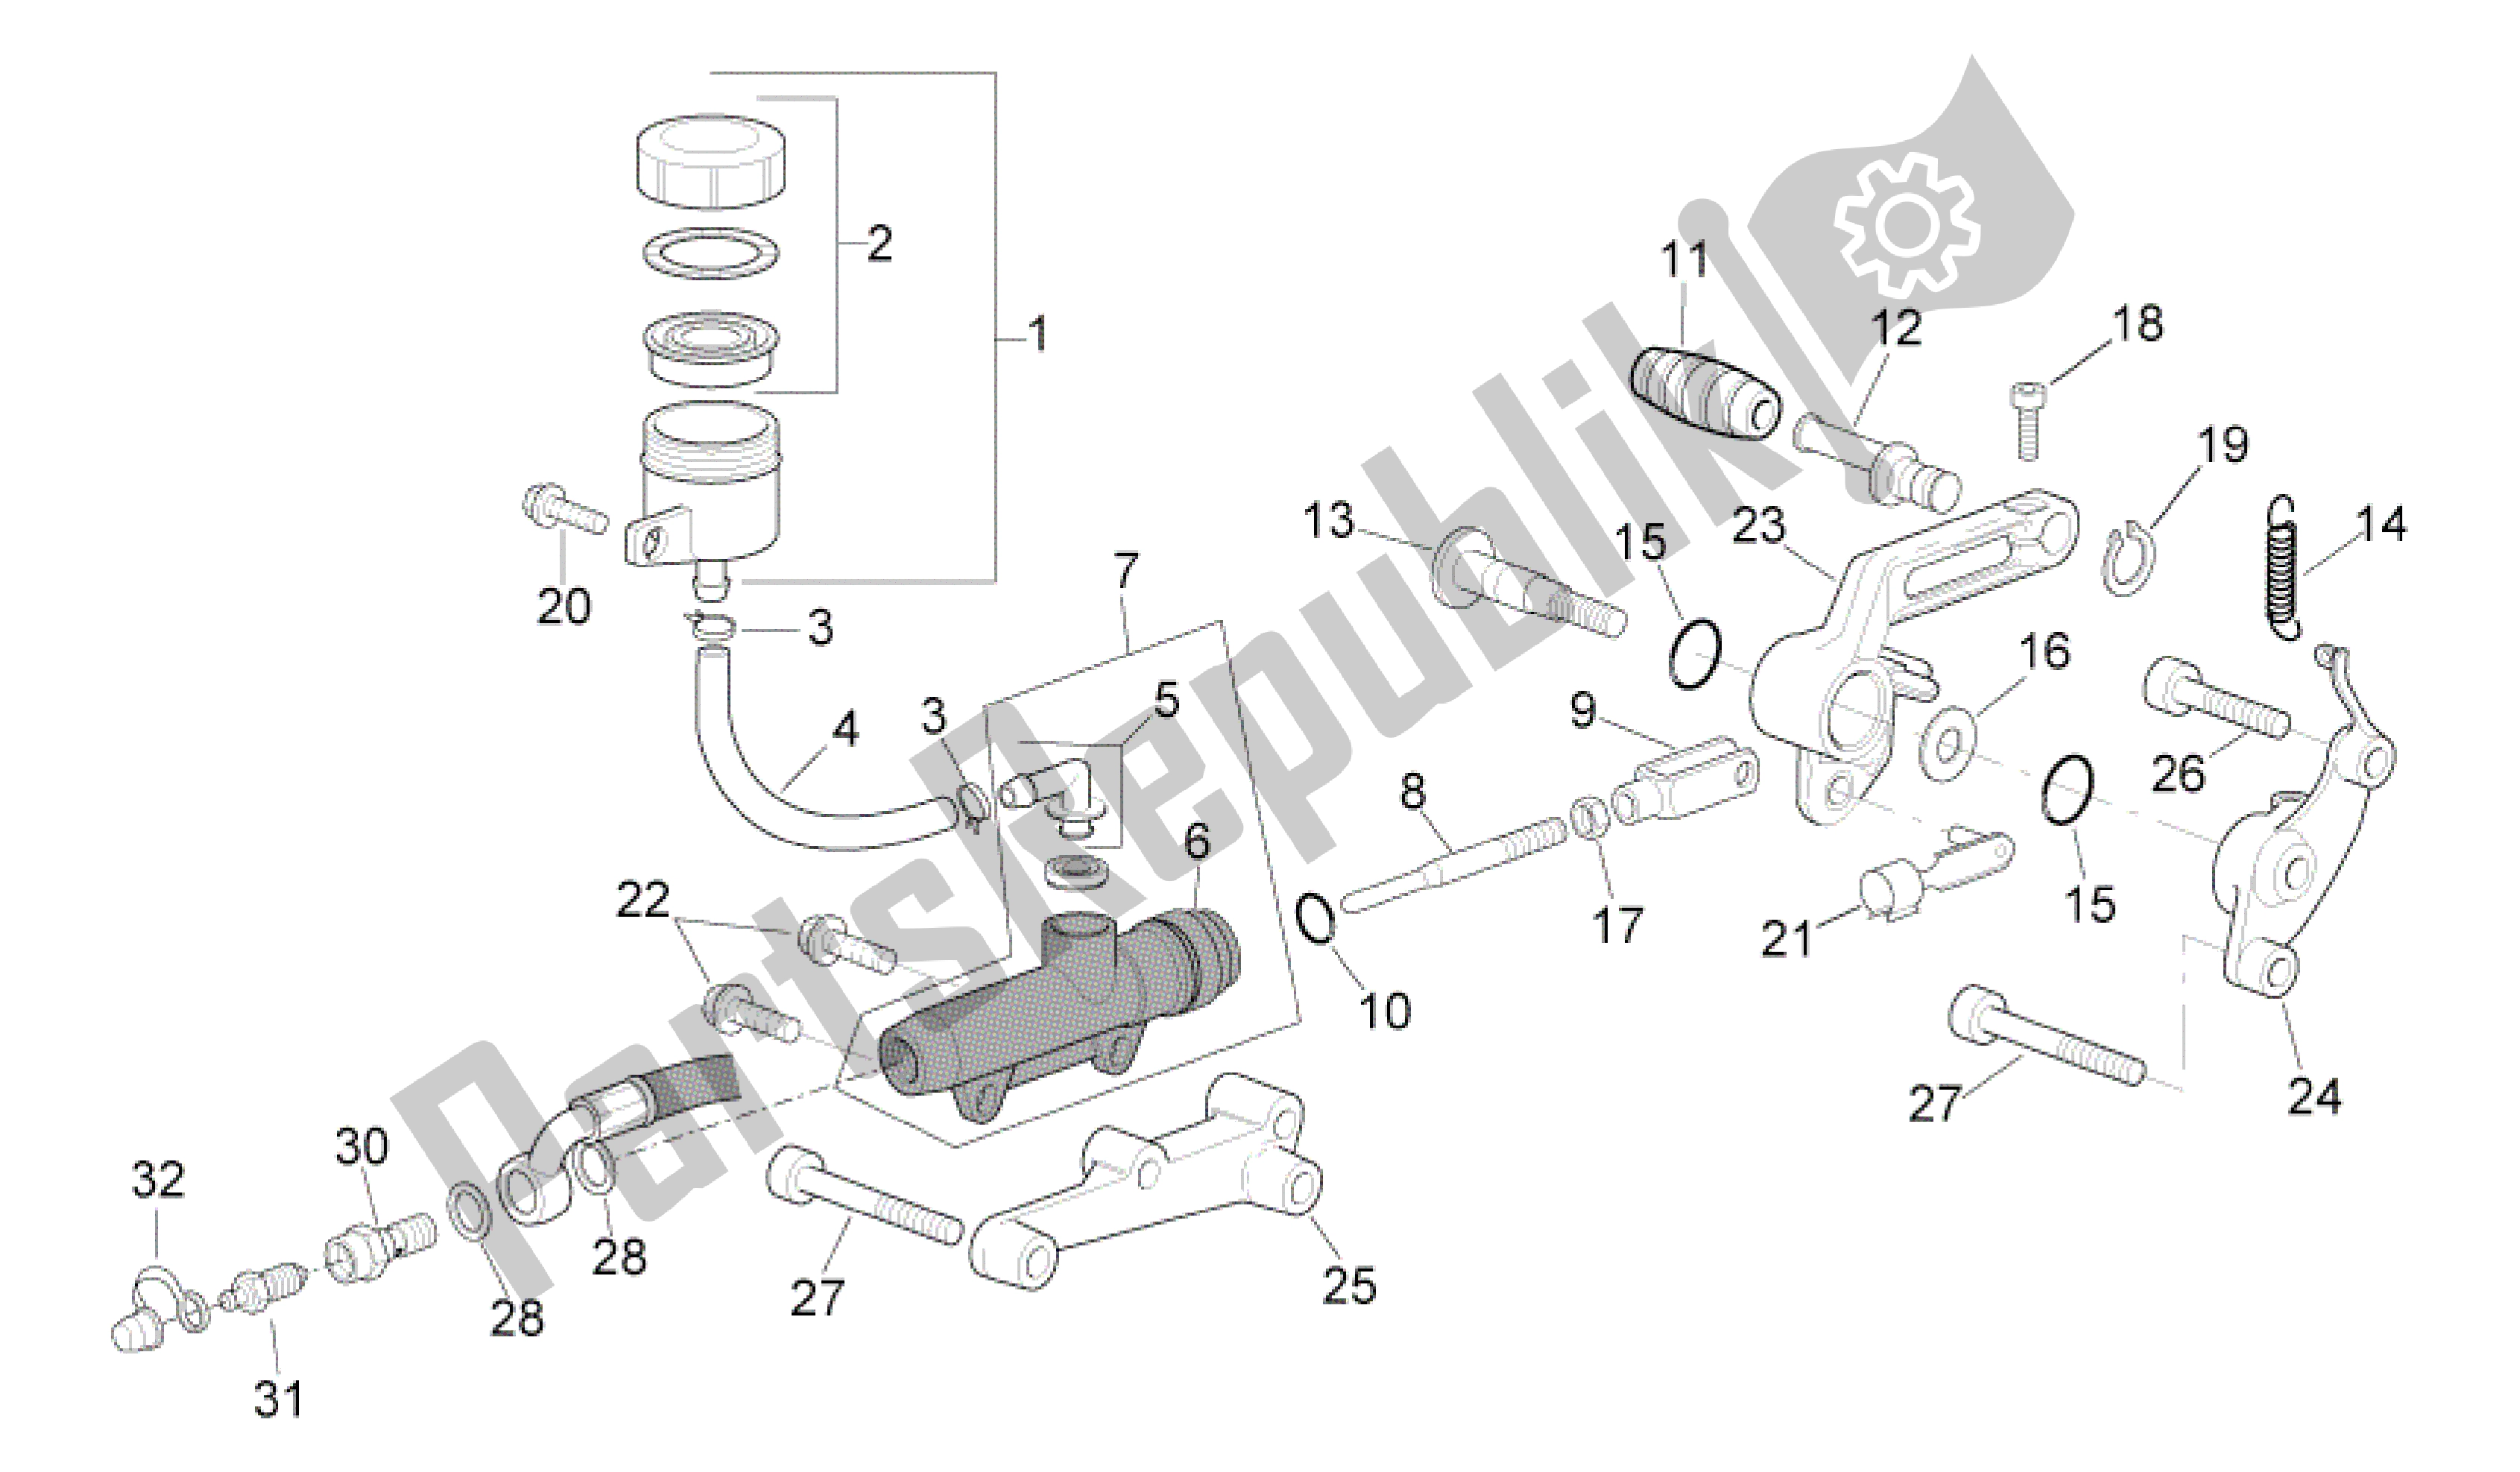 All parts for the Rear Master Cylinder of the Aprilia RSV Mille R 3963 1000 2003